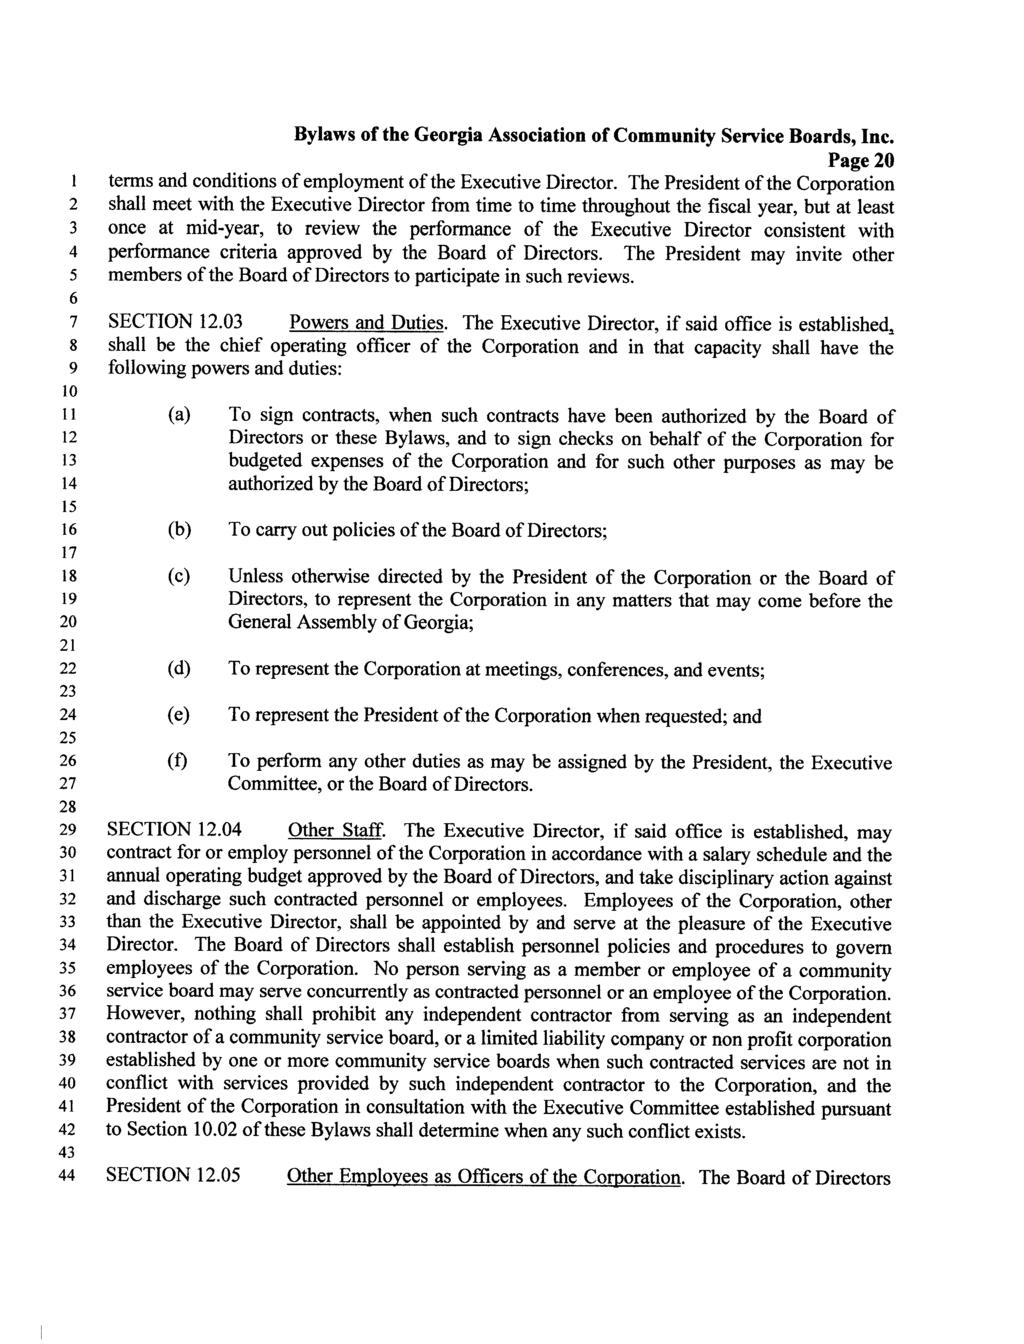 Page 20 terms and conditions of employment of the Executive Director.